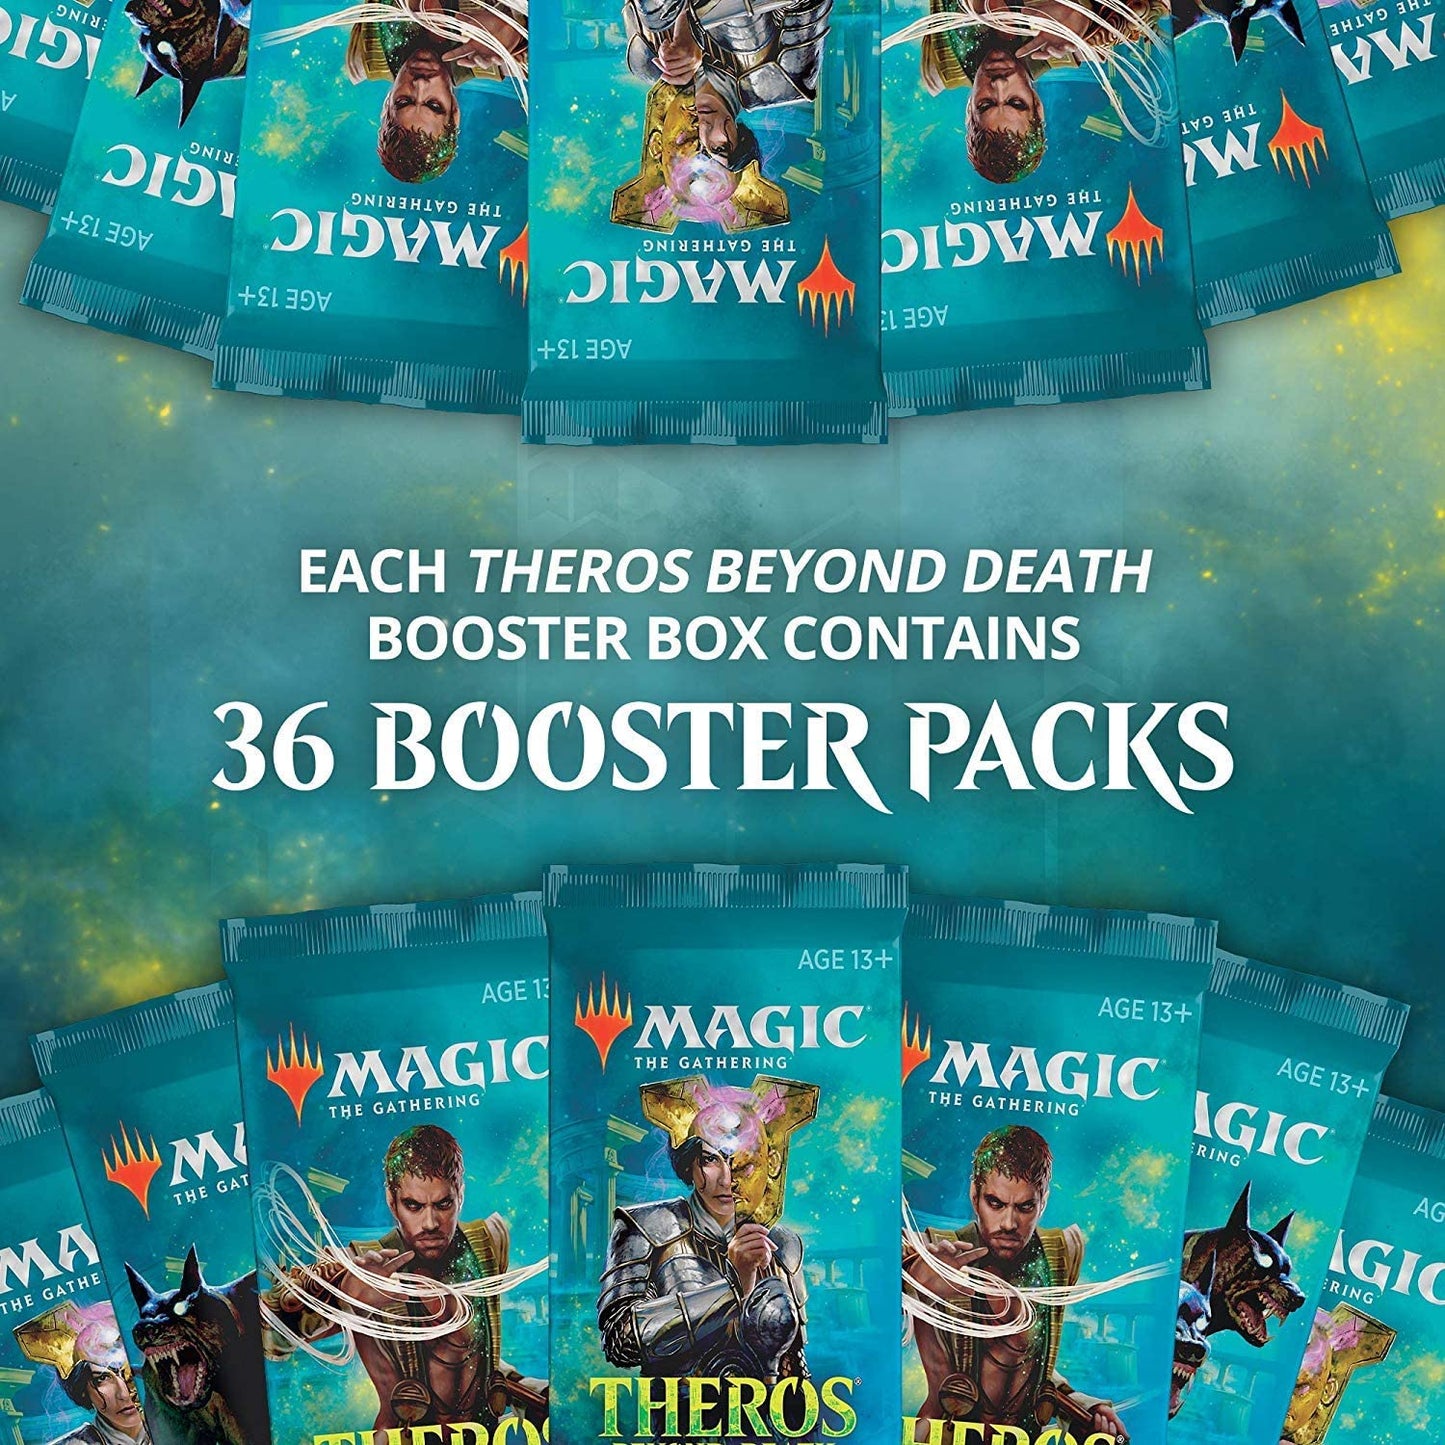 MTG: Theros Beyond Death Draft Booster Pack (Toys)